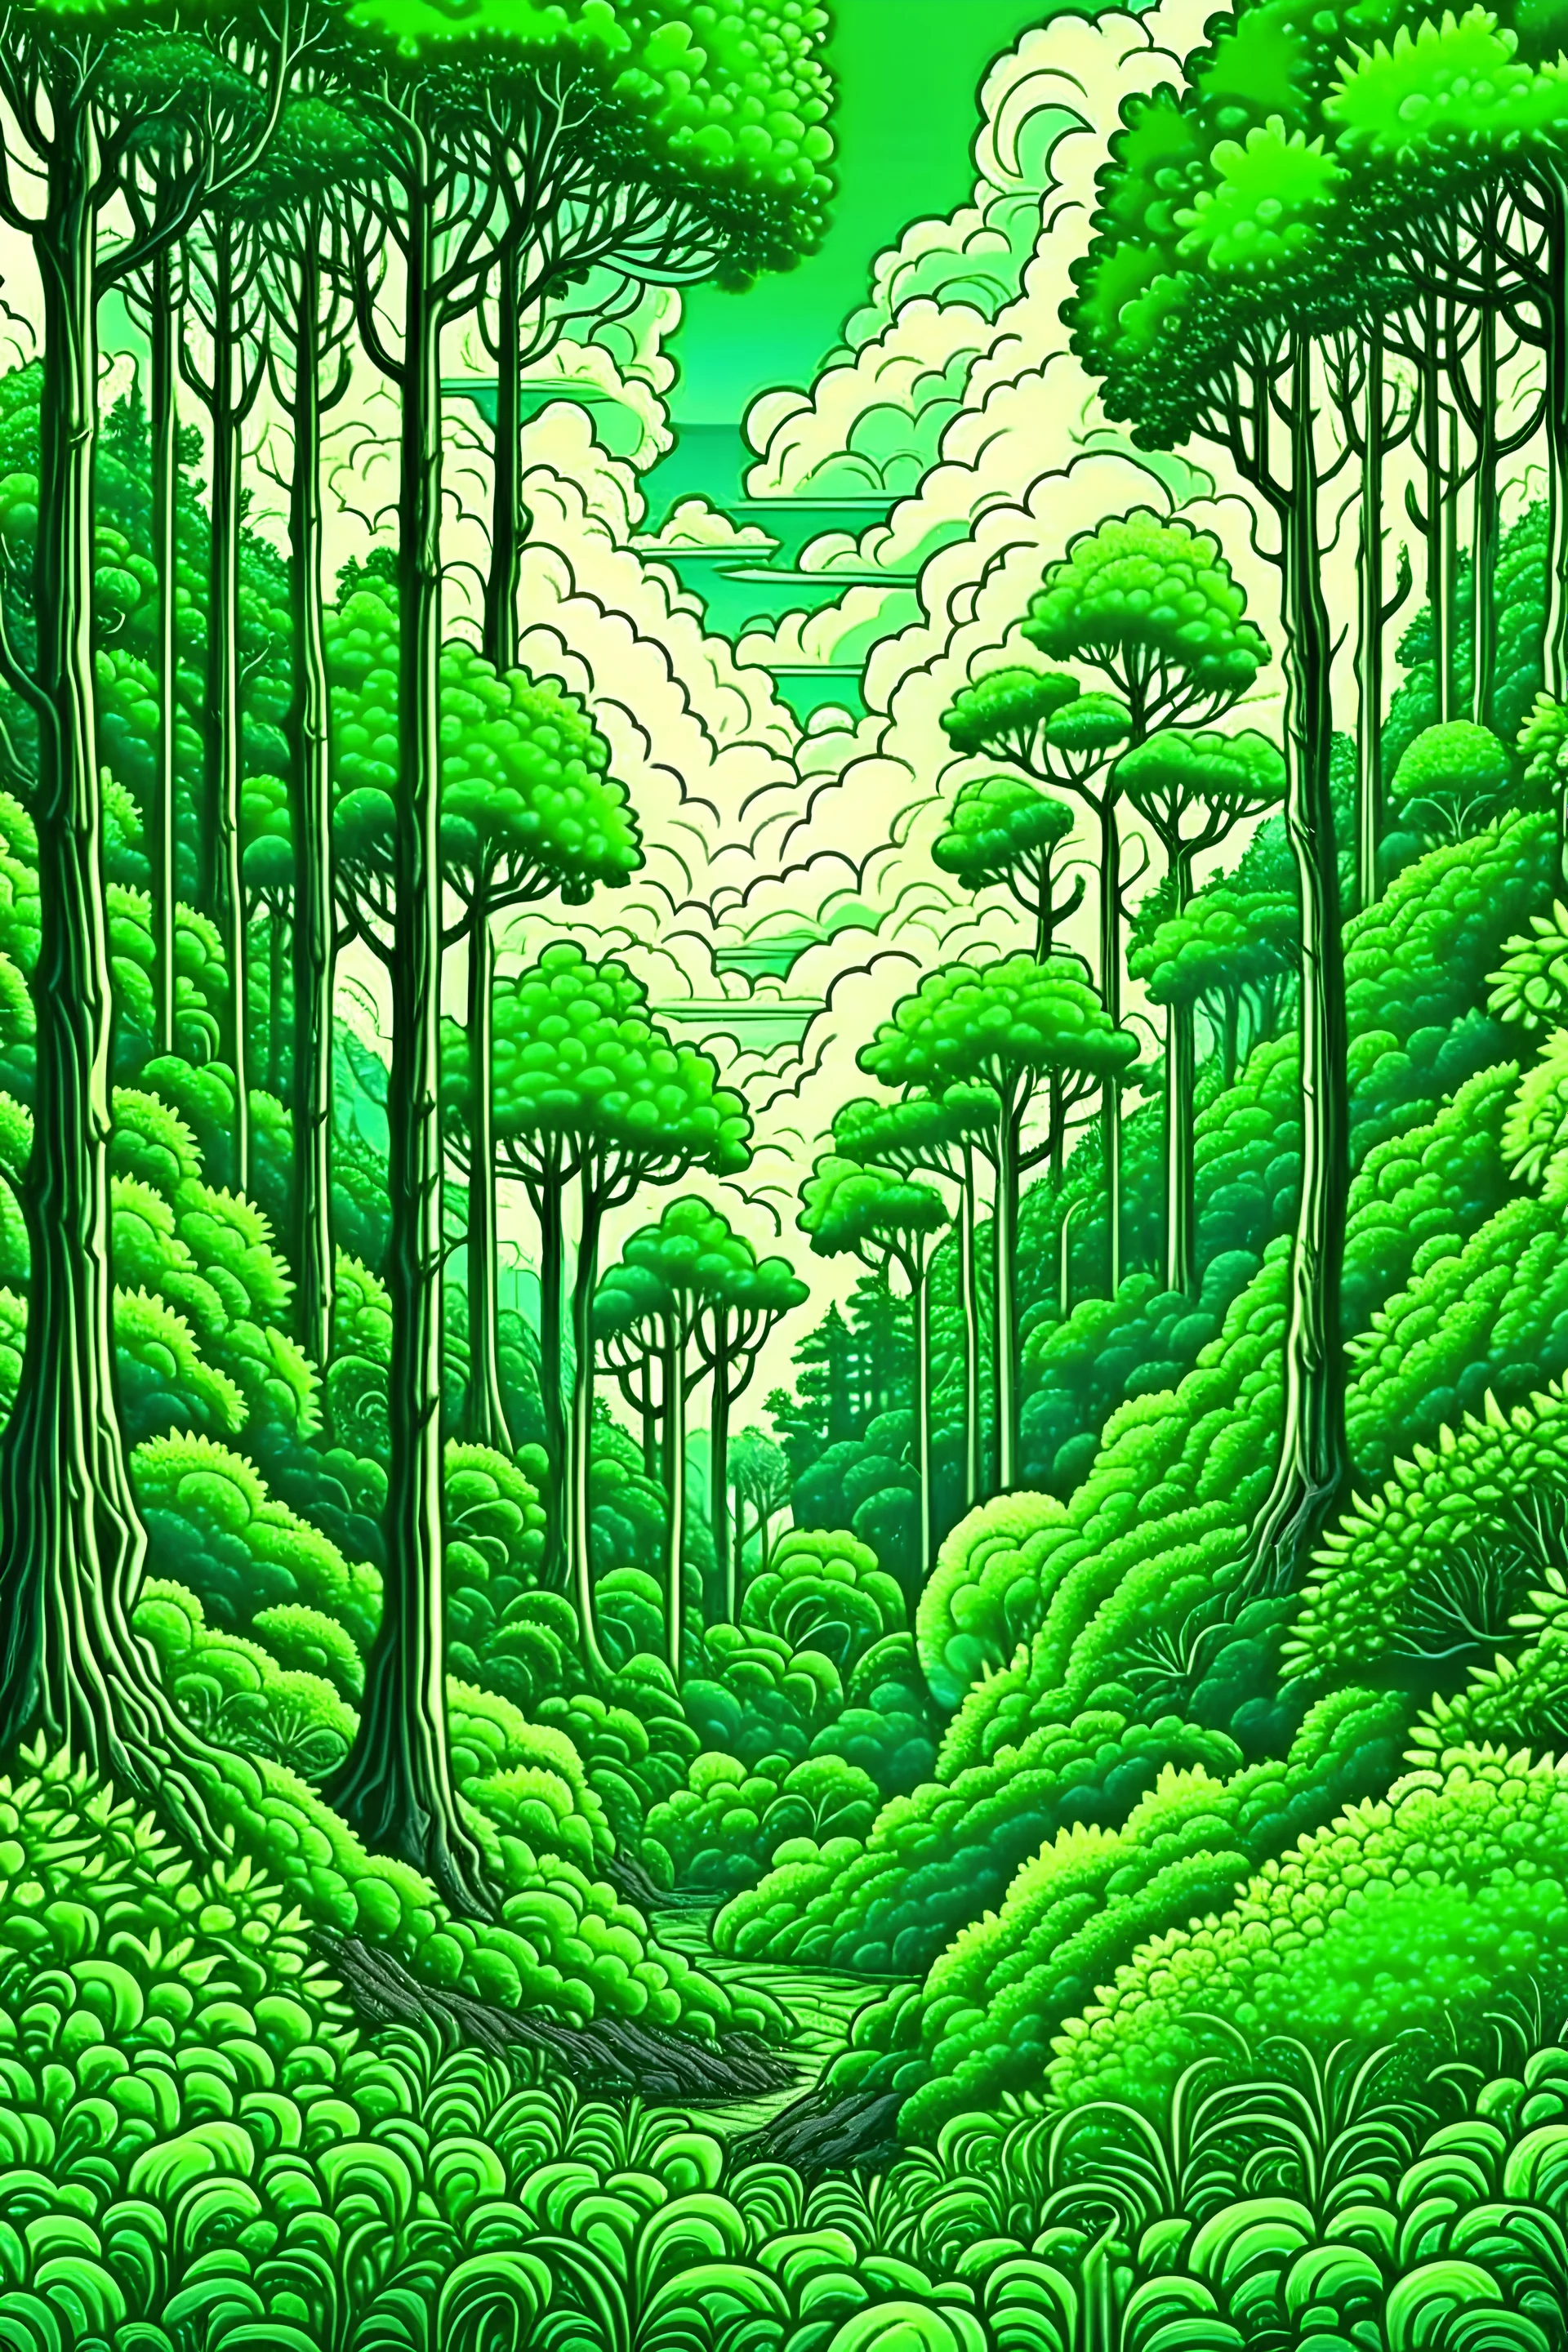 Forest Scenery Drawing Easy | Forest Scenery Drawing Step By Step |  Wildlife Drawing Easy - YouTube